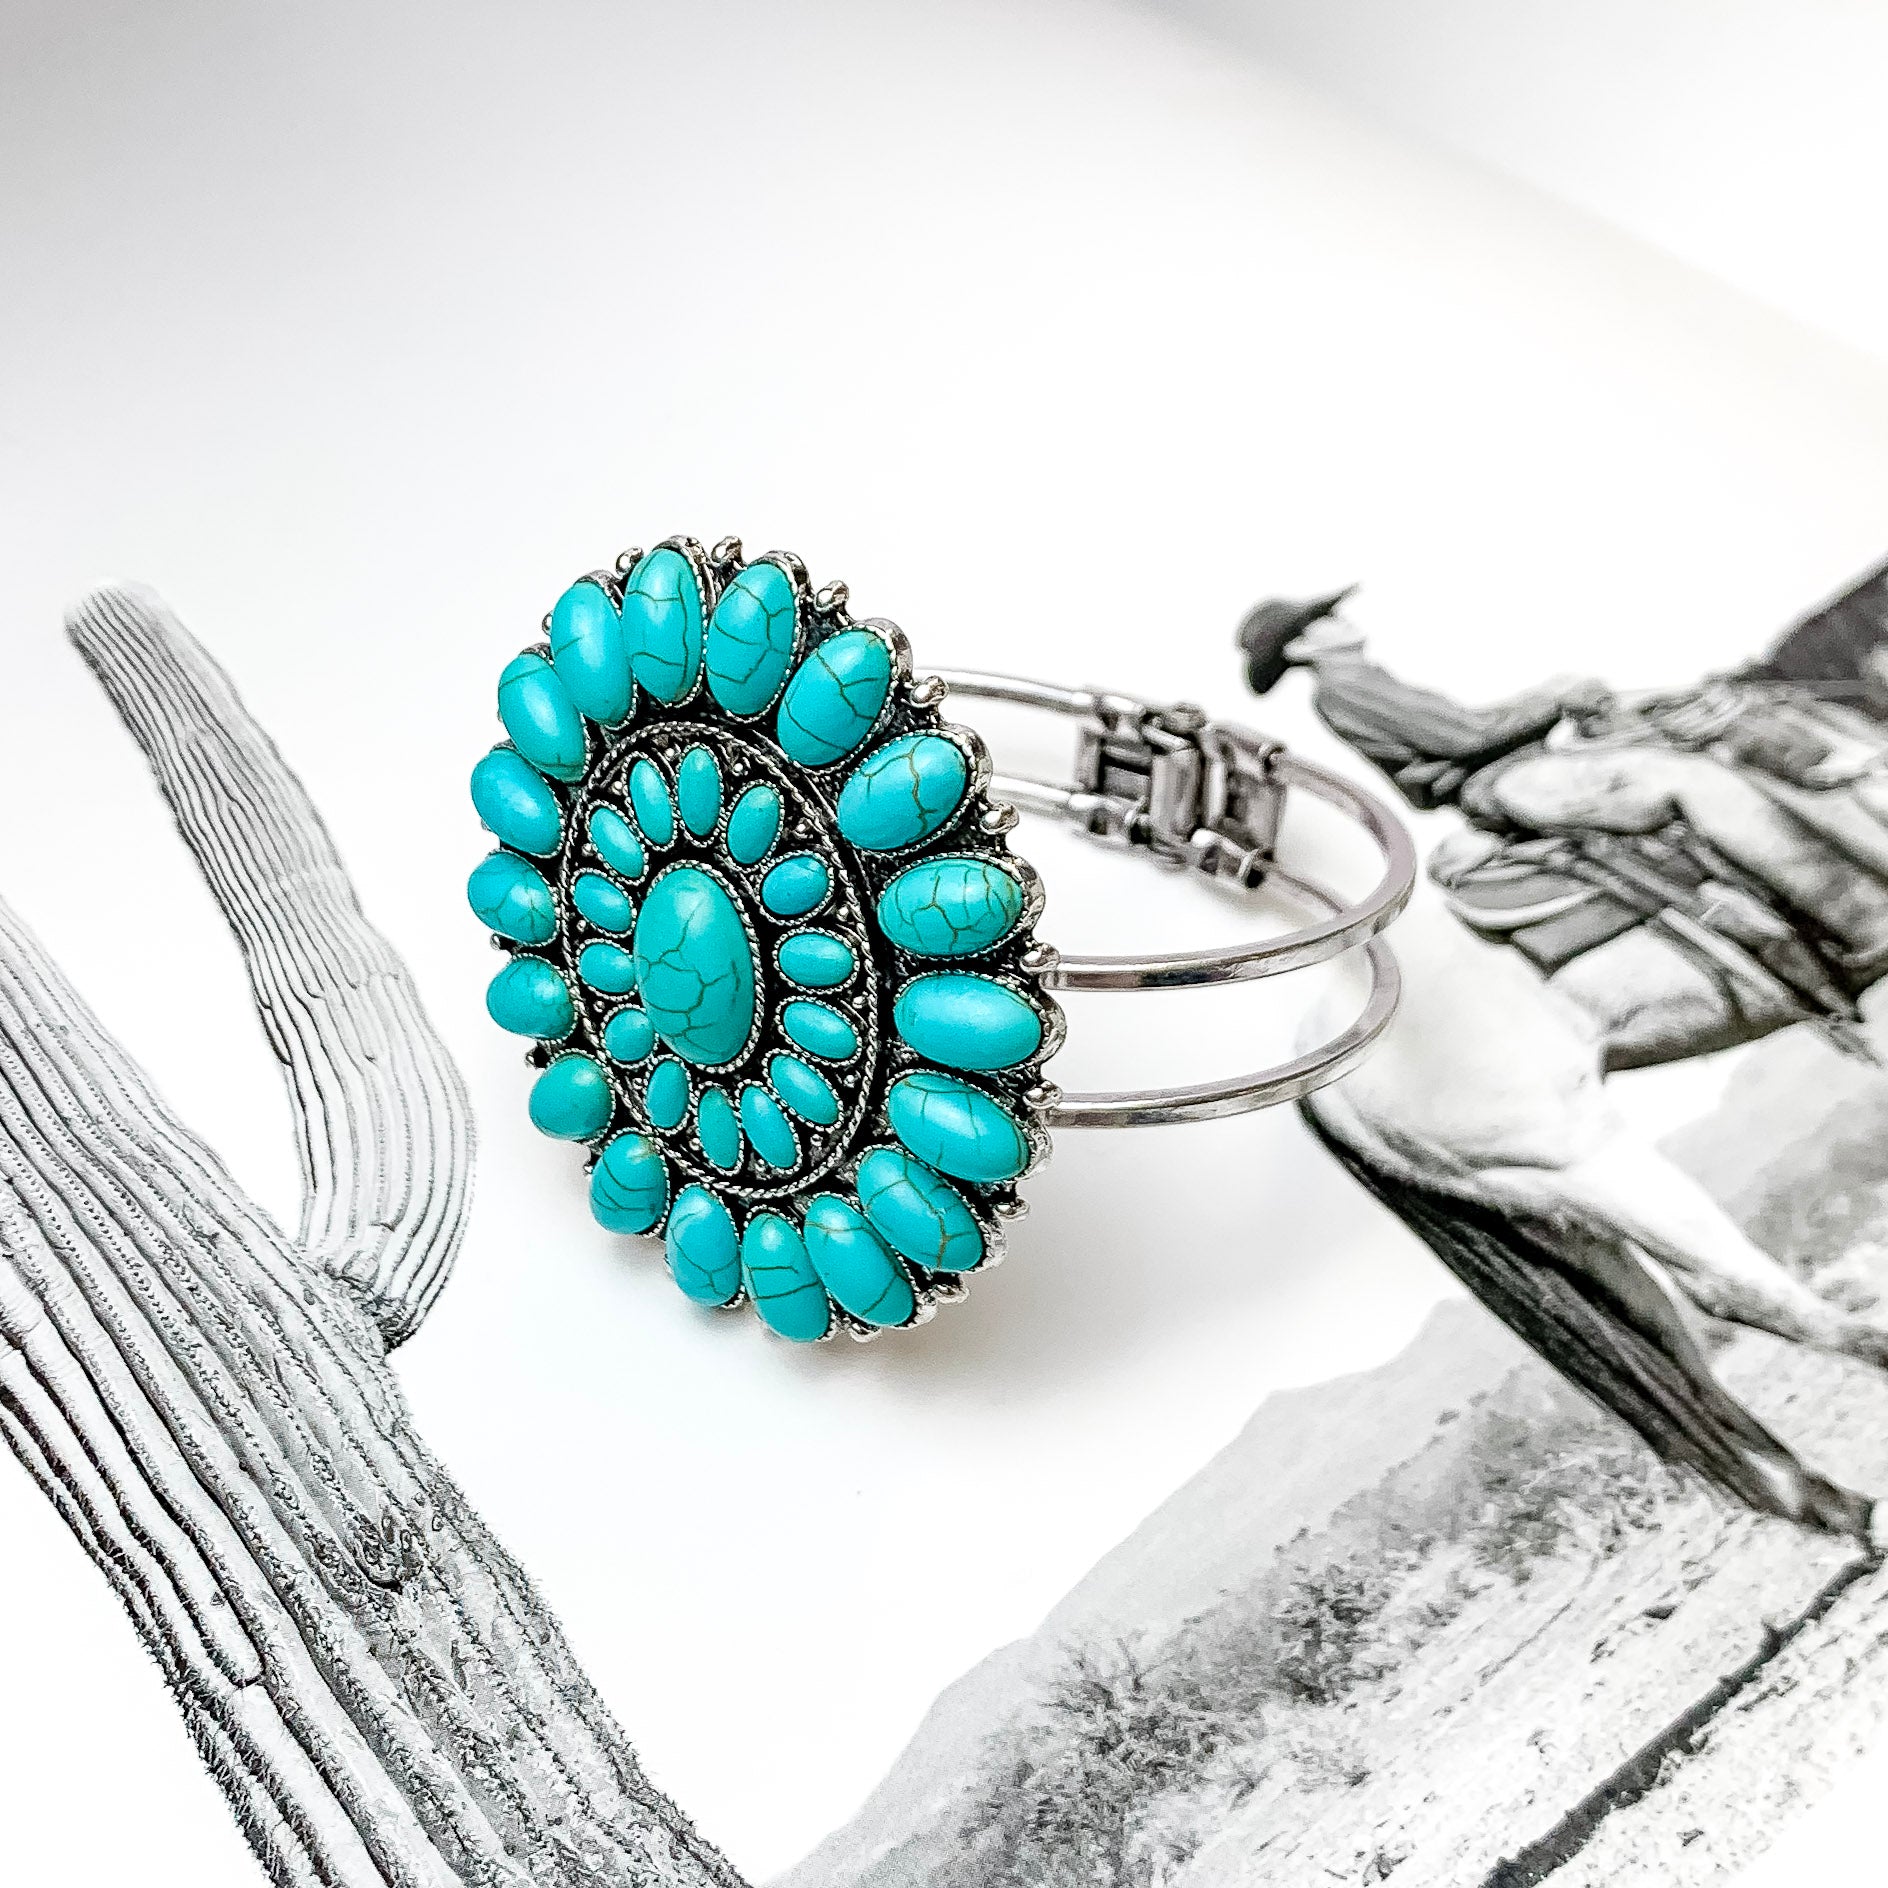 Turquoise Oval Stone Concho Hinge Cuff Bracelet - Giddy Up Glamour Boutique